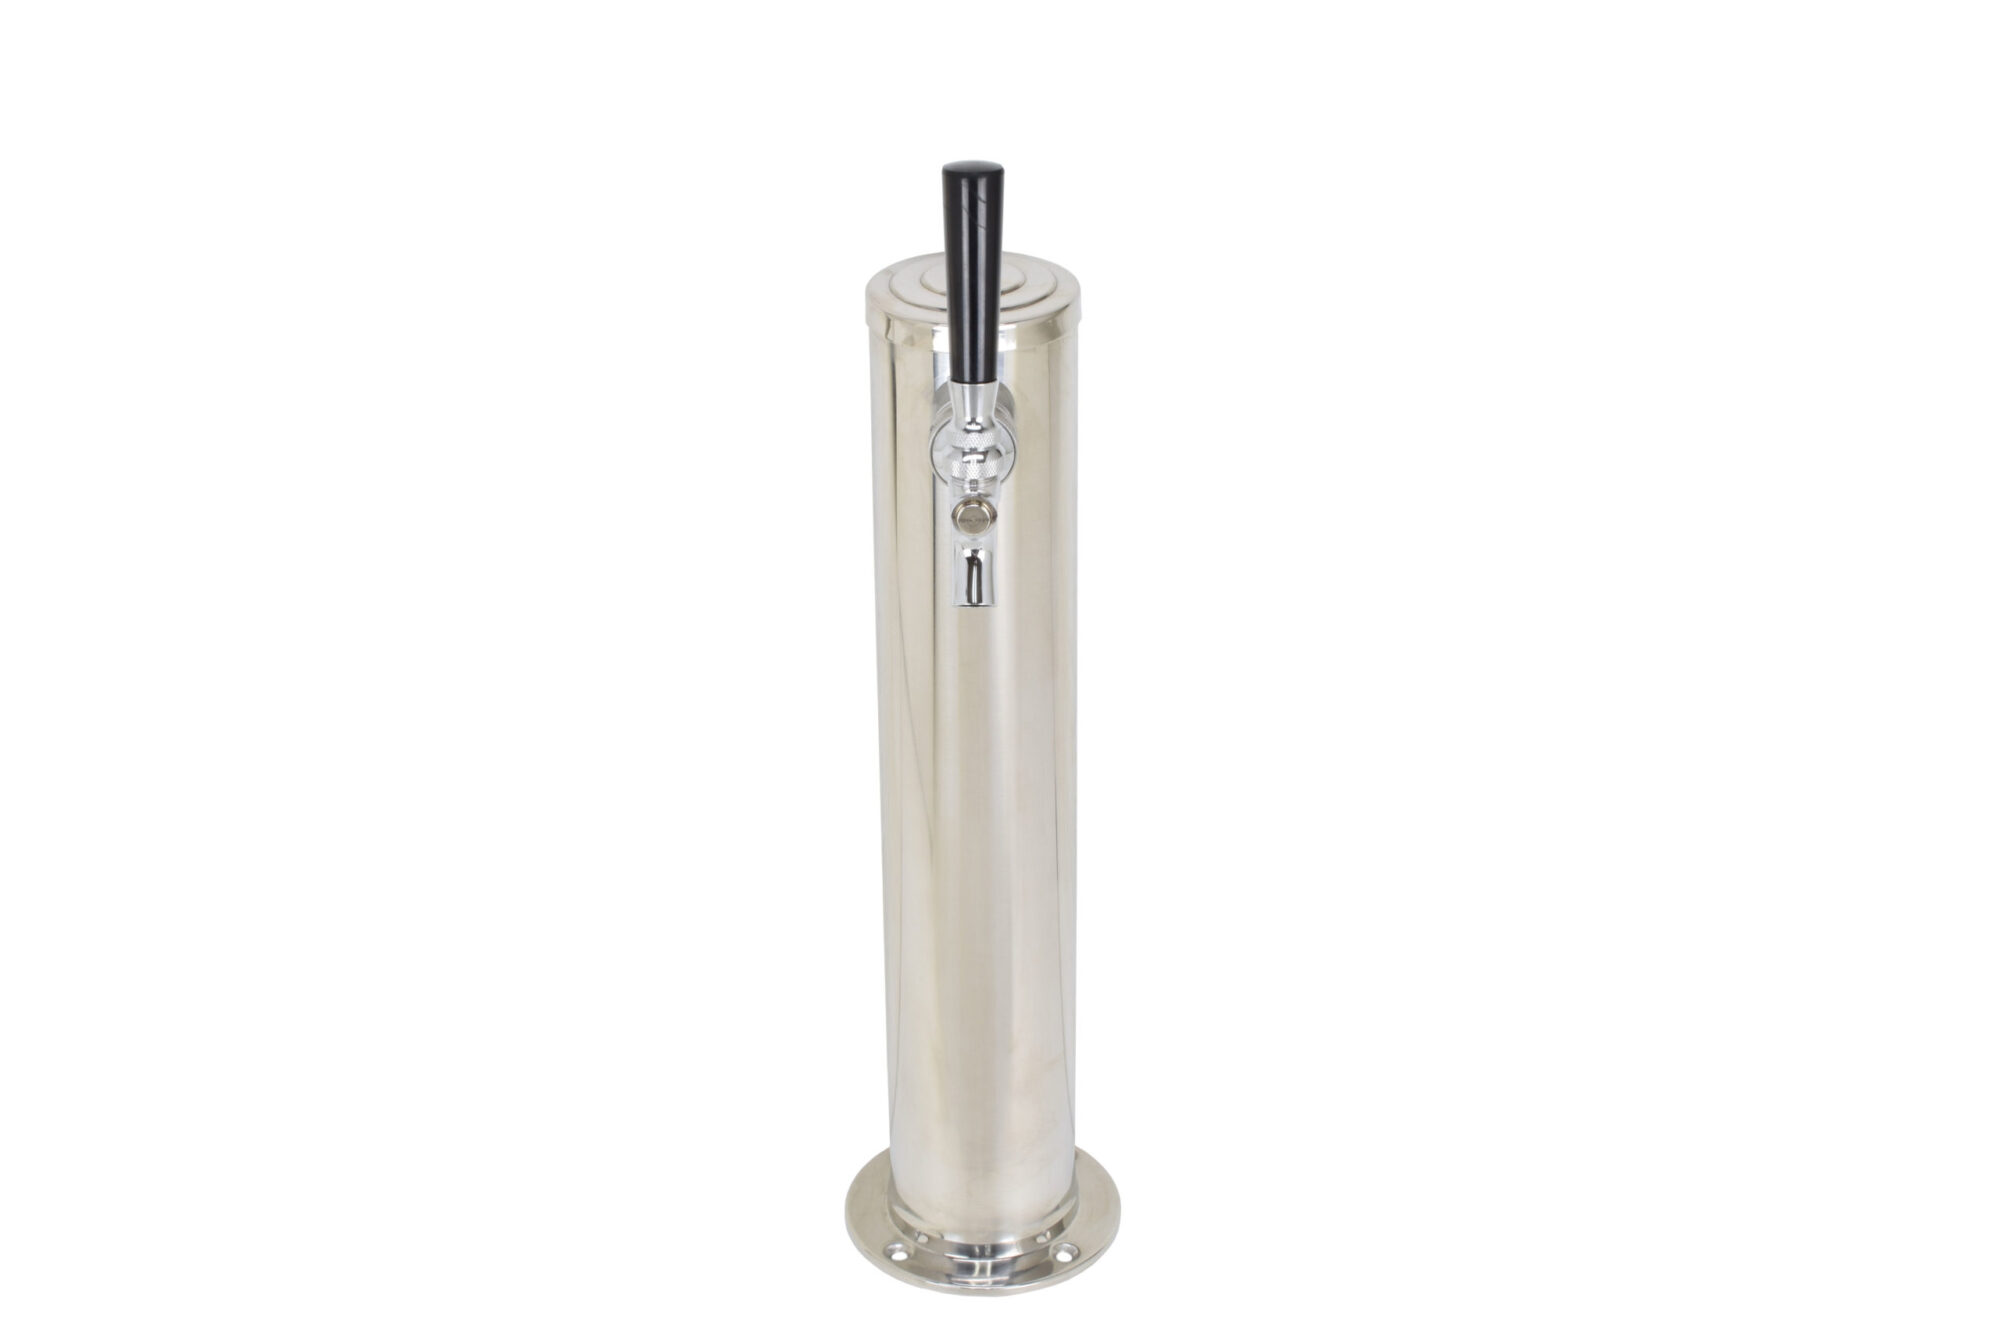 618X-16 One Product Single Column Tower - 16" Height